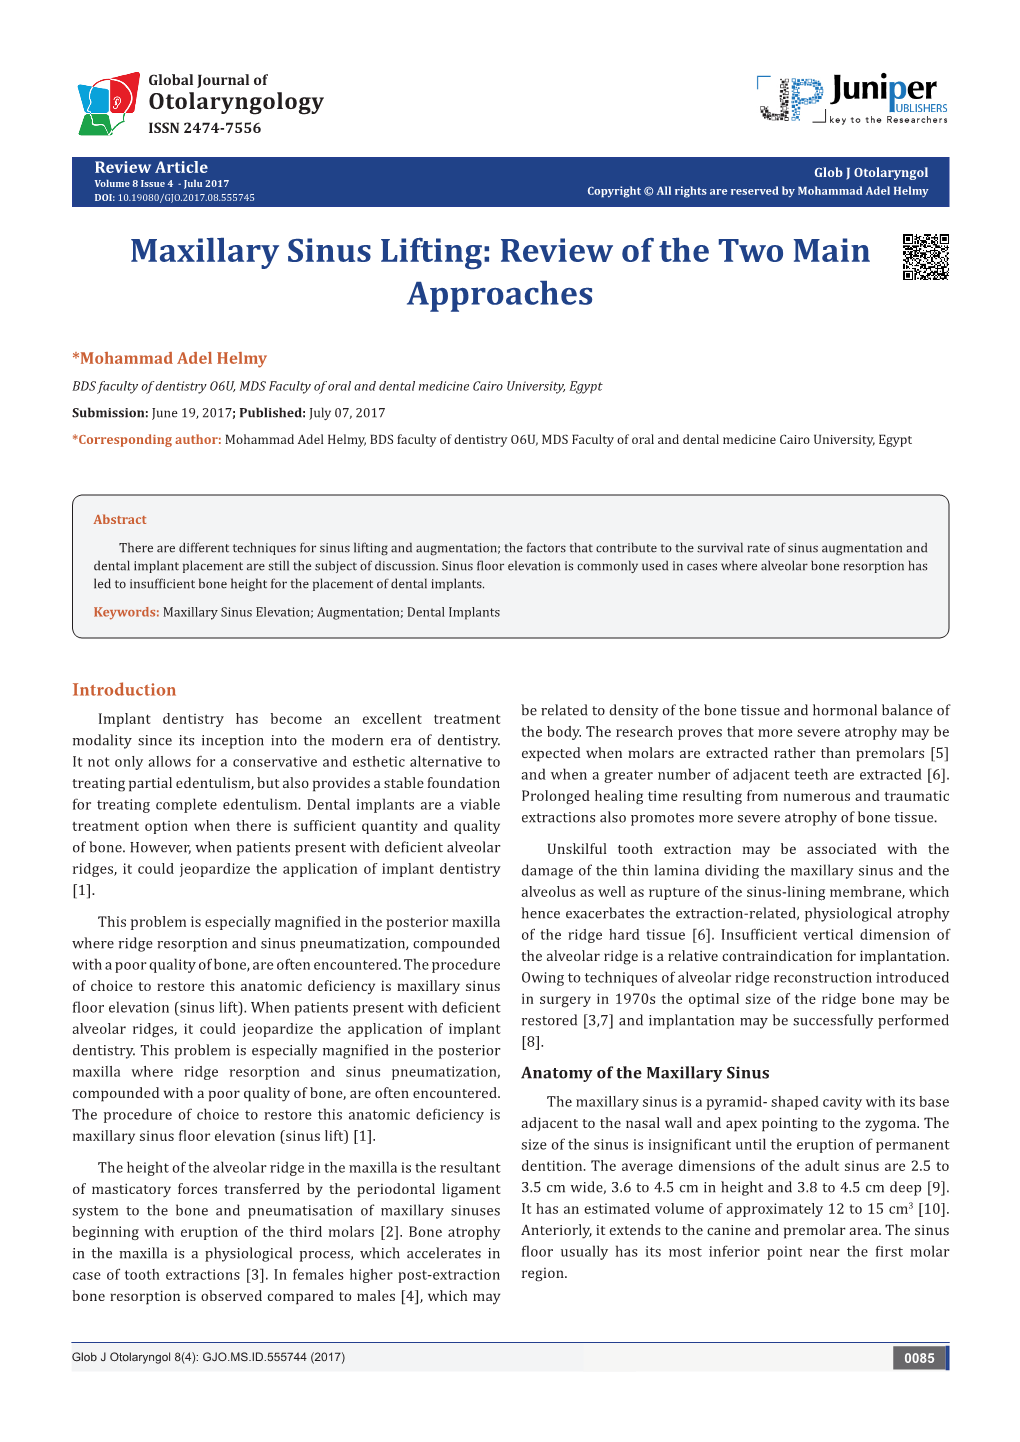 Maxillary Sinus Lifting: Review of the Two Main Approaches